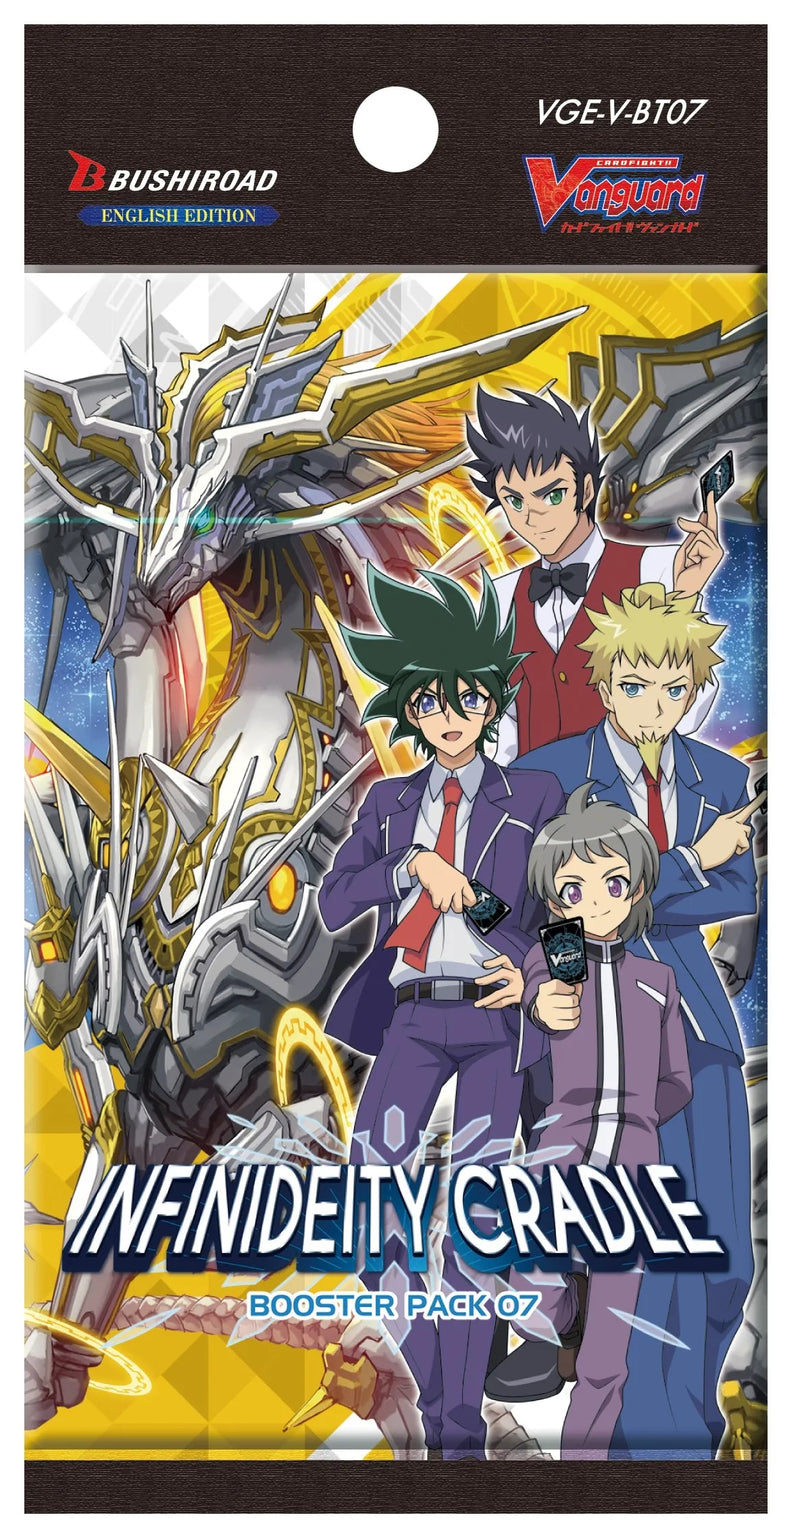 Cardfight!! Vanguard Infinideity Cradle Booster Pack 07